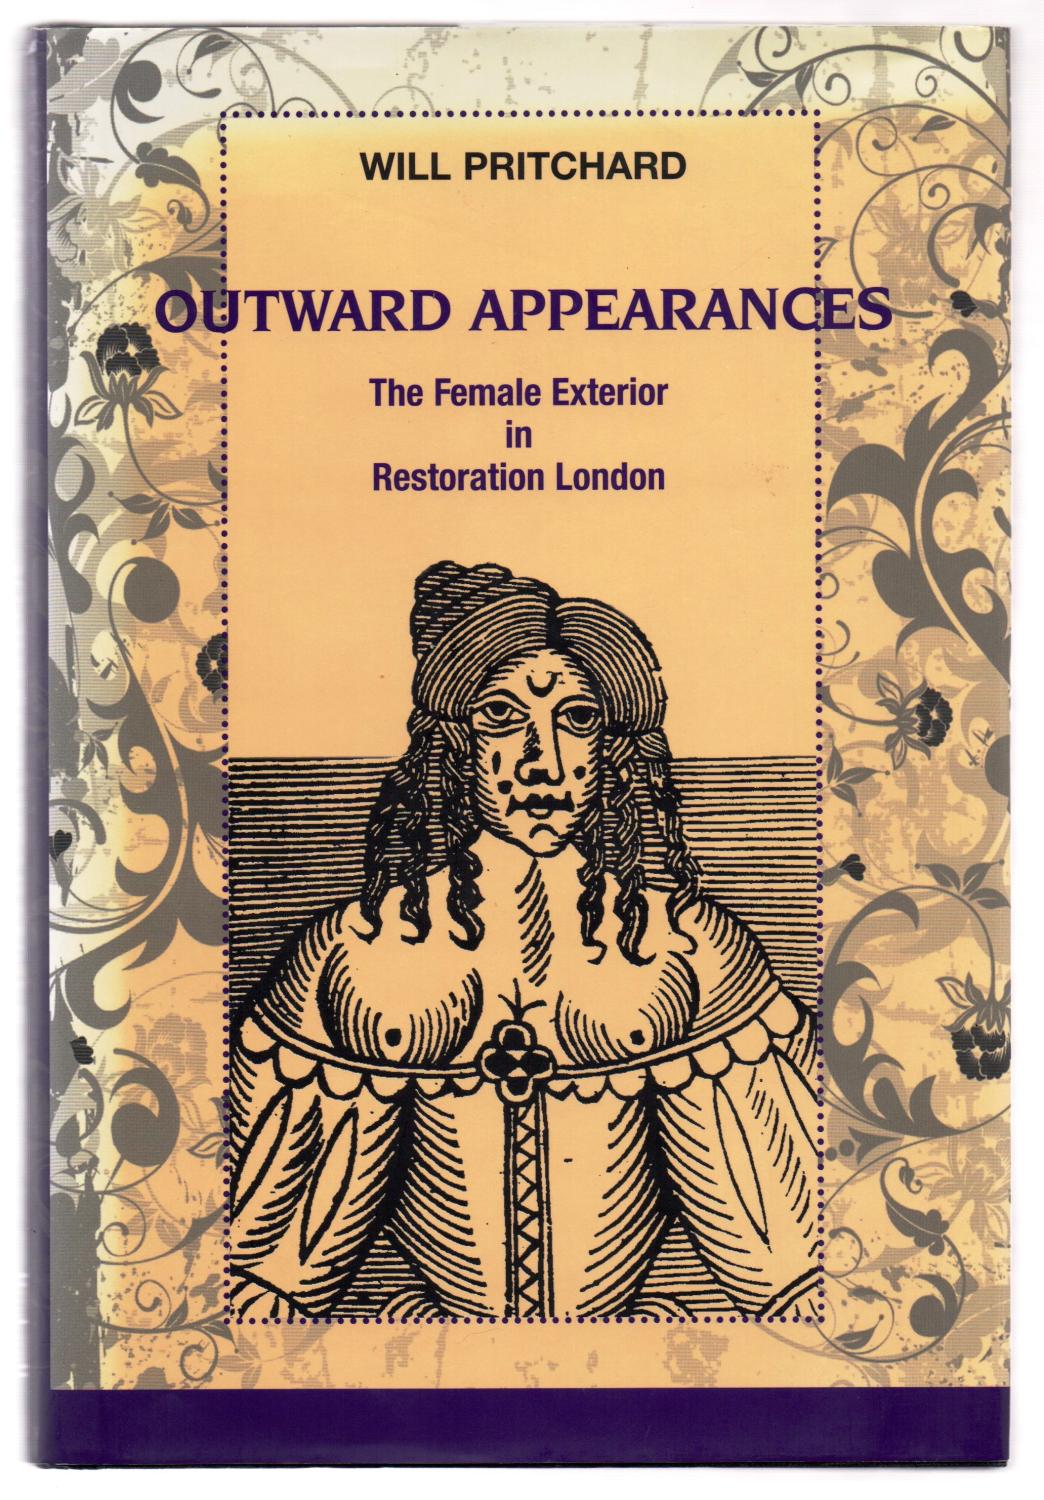 Outward Appearances: The Female Exterior in Restoration London - PRITCHARD, Will